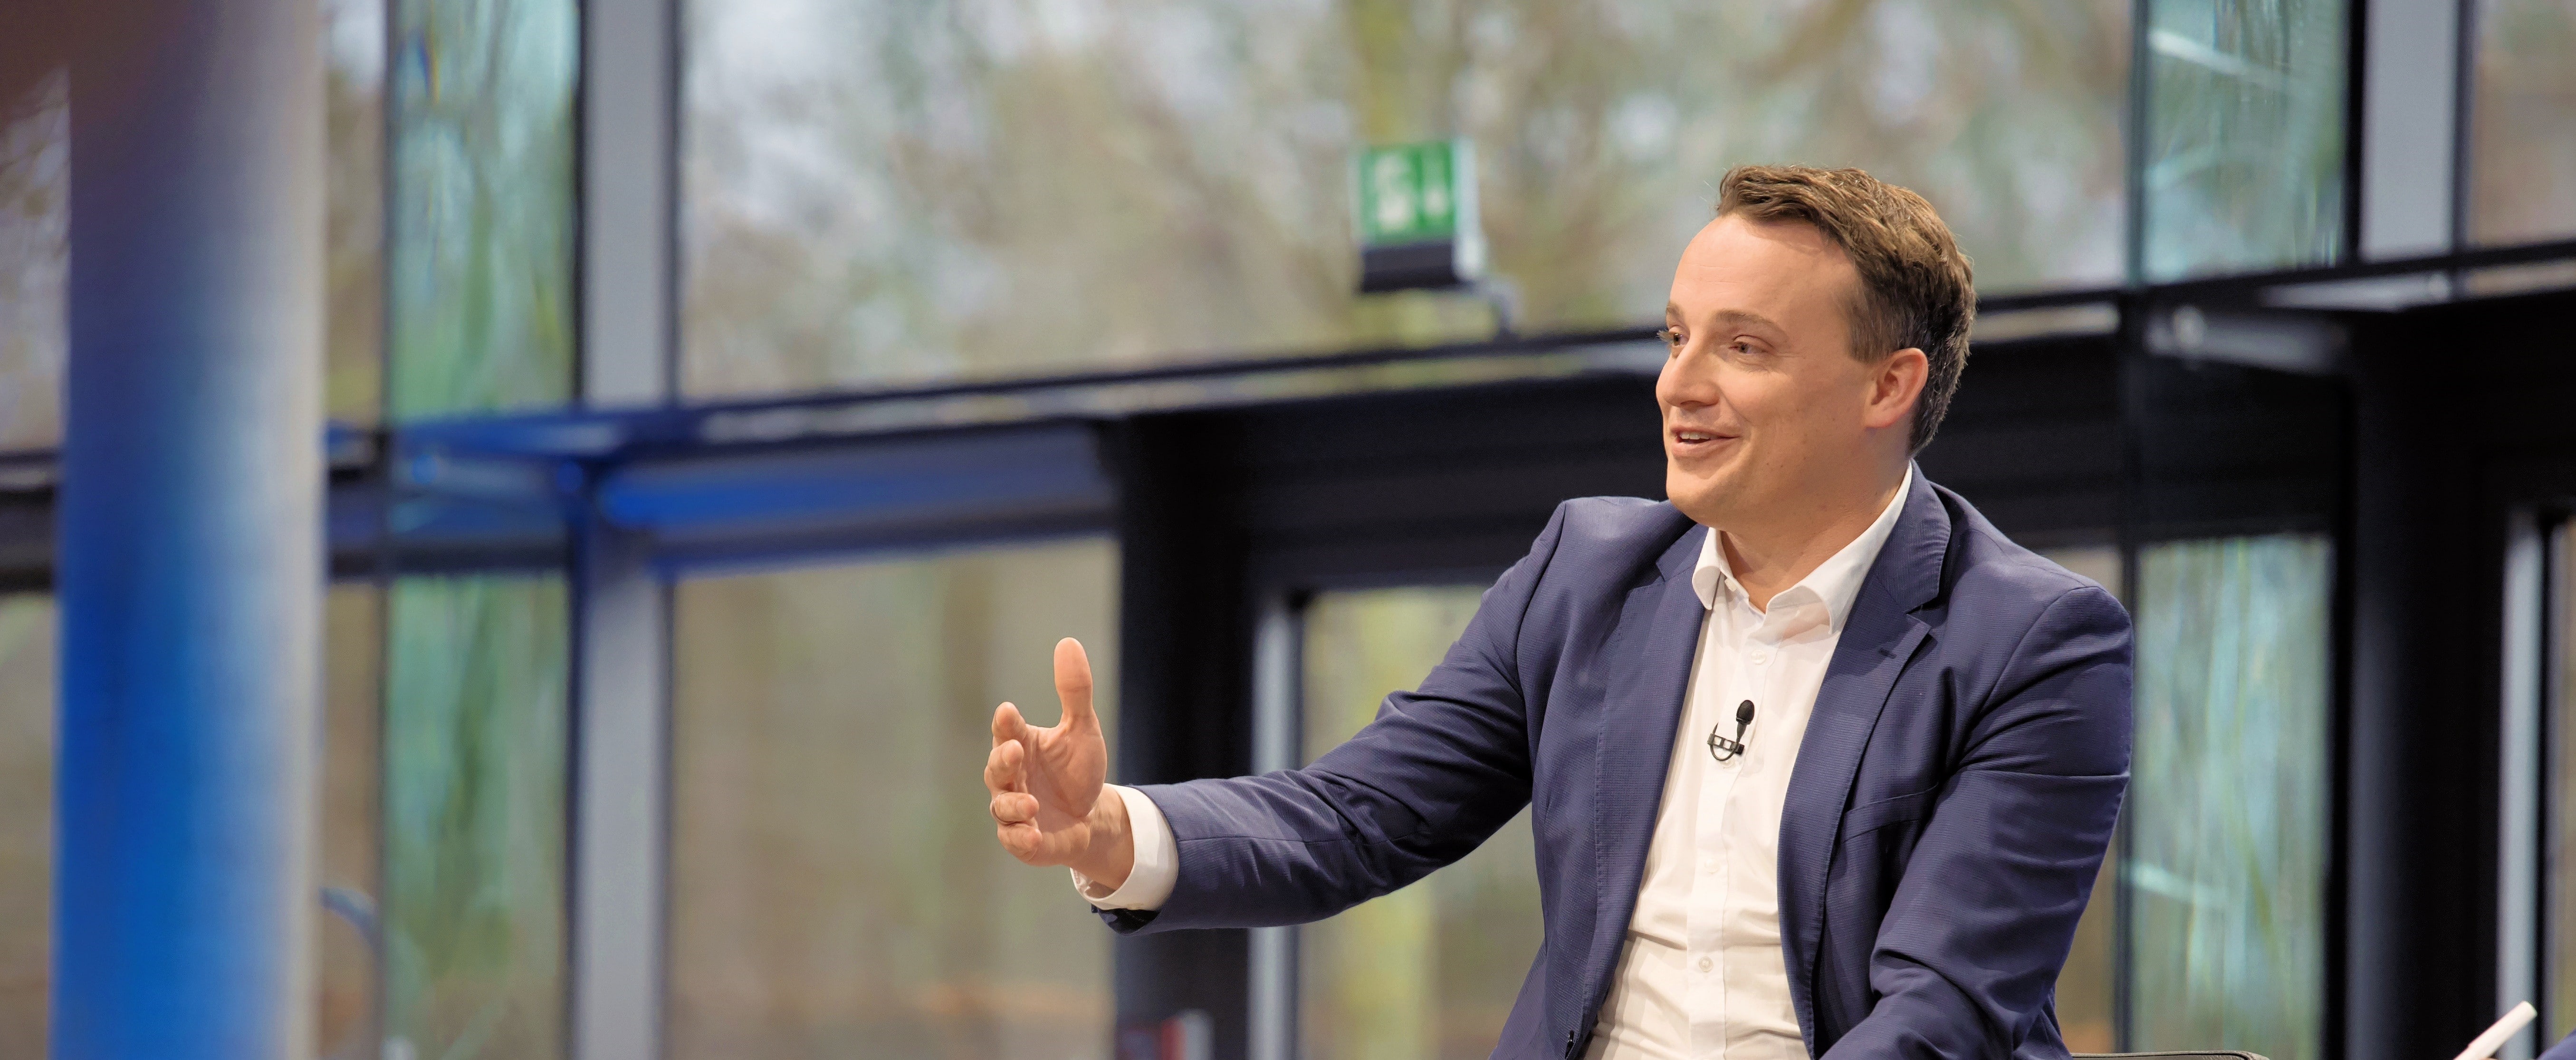 SAP CEO Christian Klein: When People and Technology Meet, Amazing Things Happen